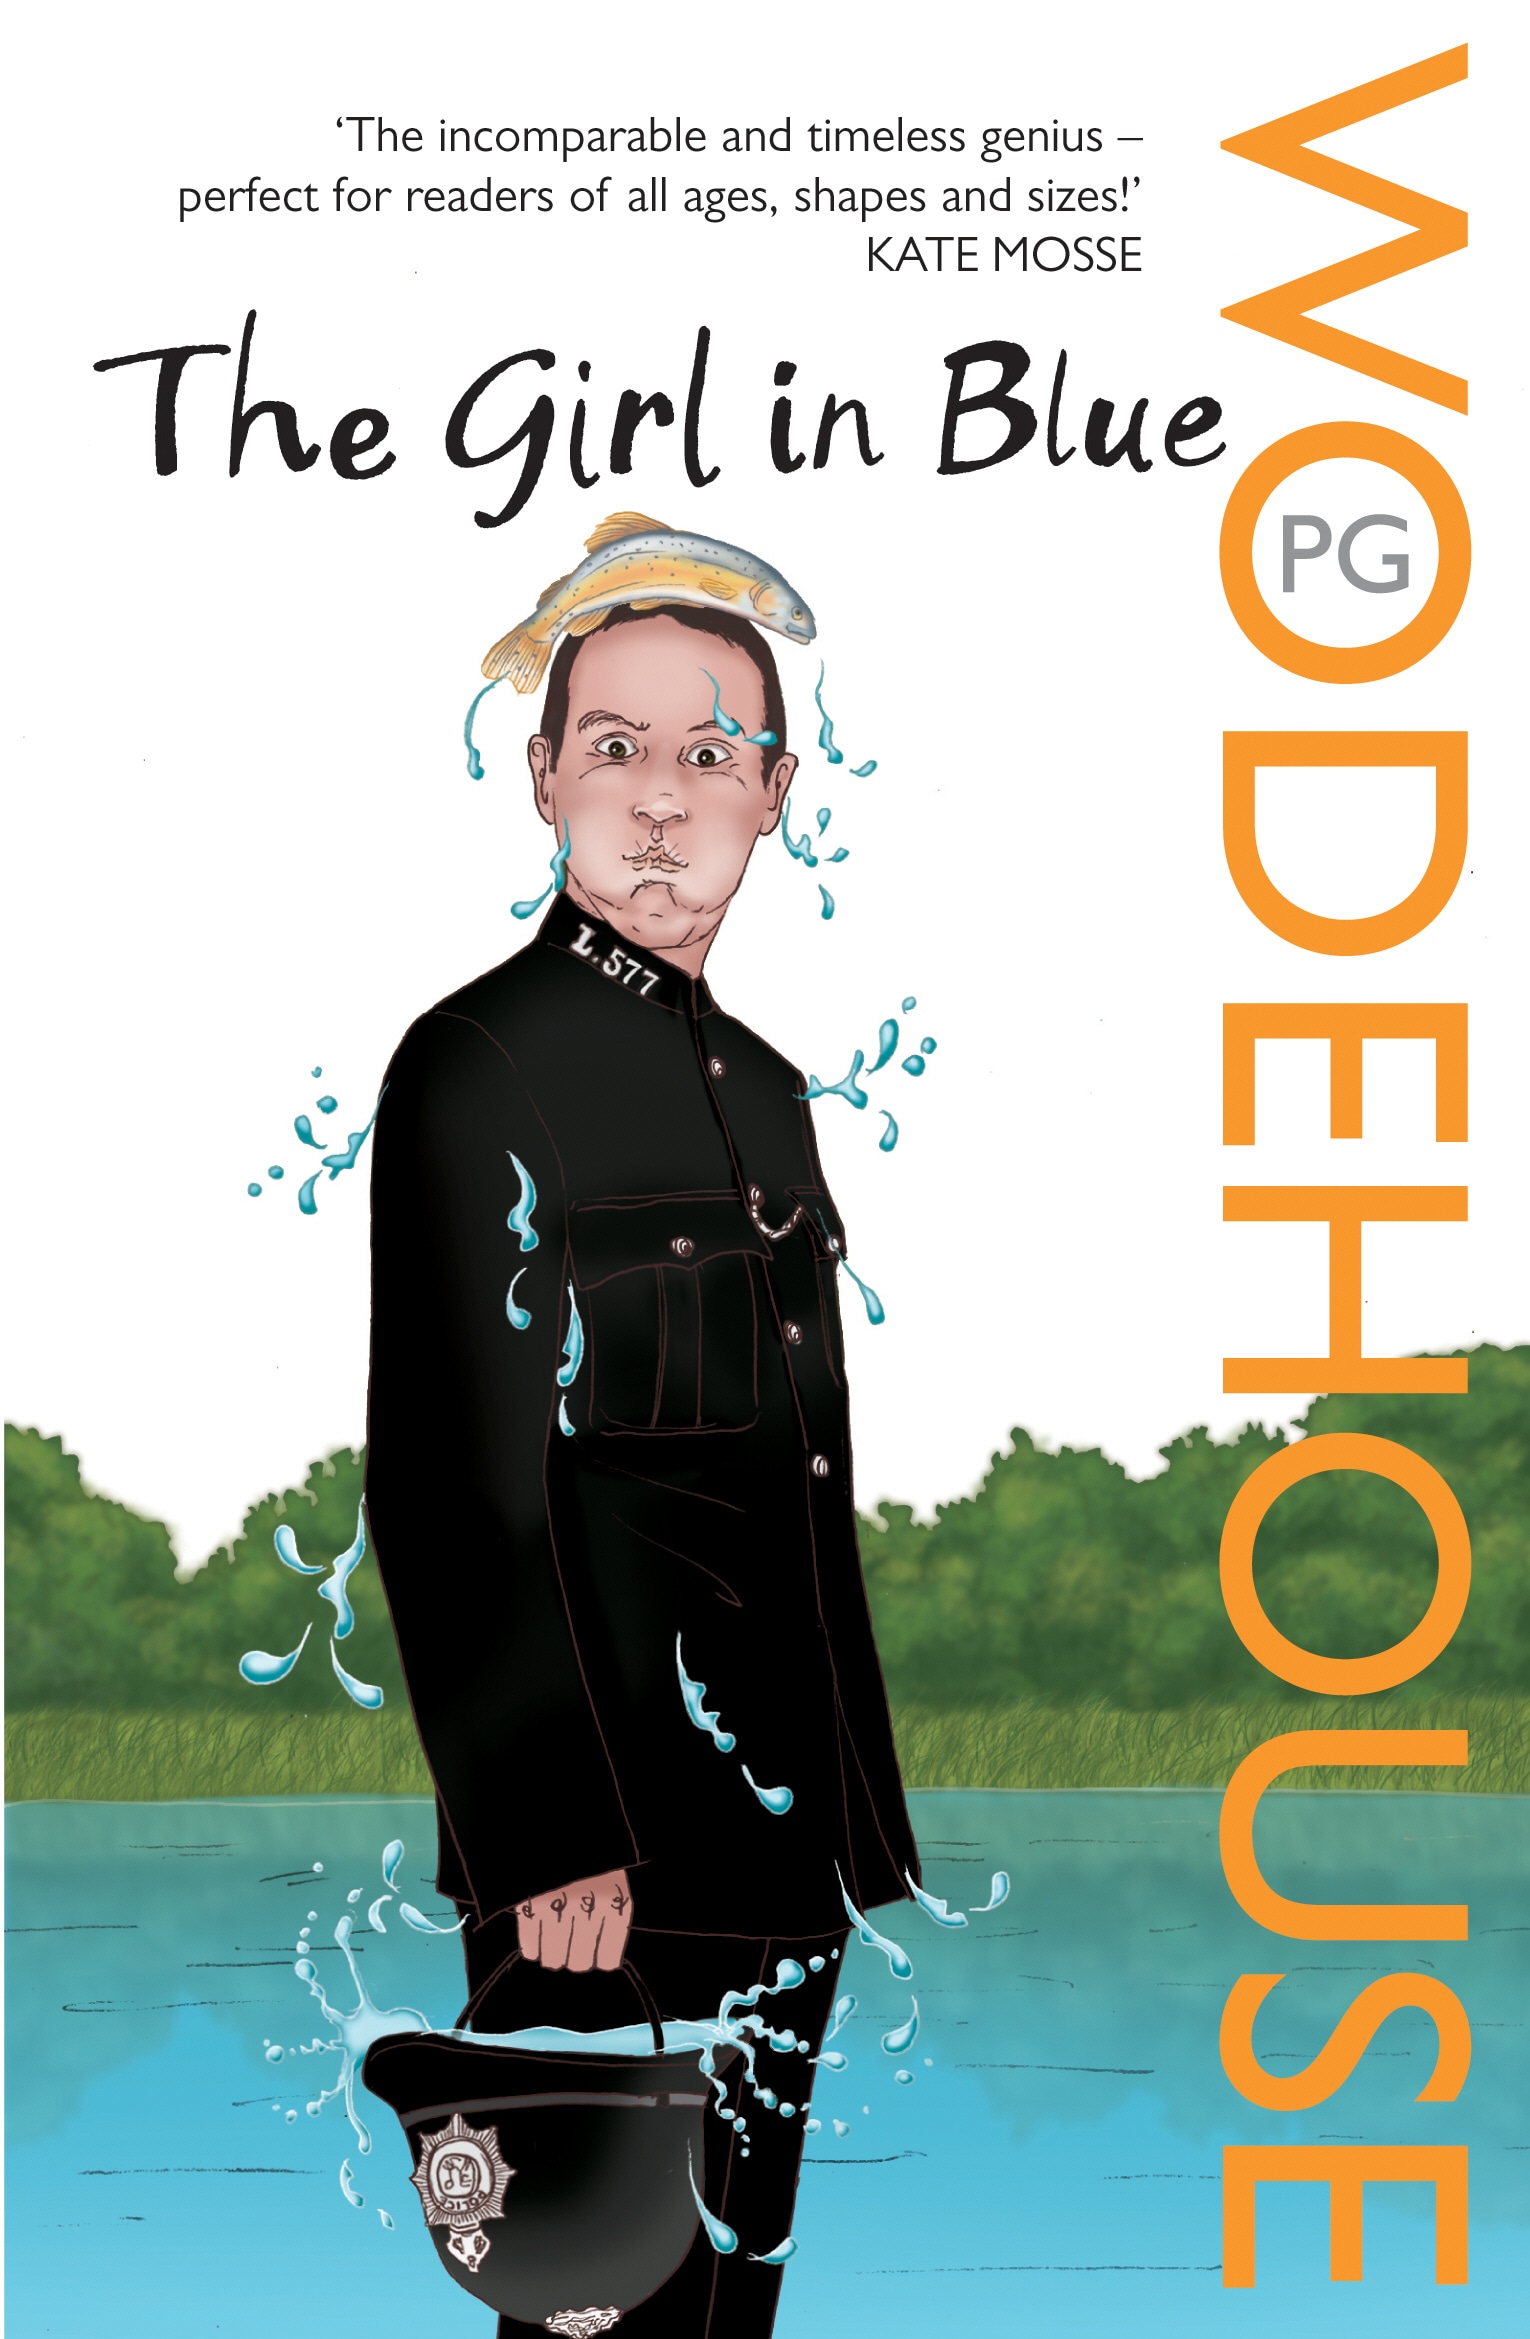 Book “The Girl in Blue” by P.G. Wodehouse — October 2, 2008